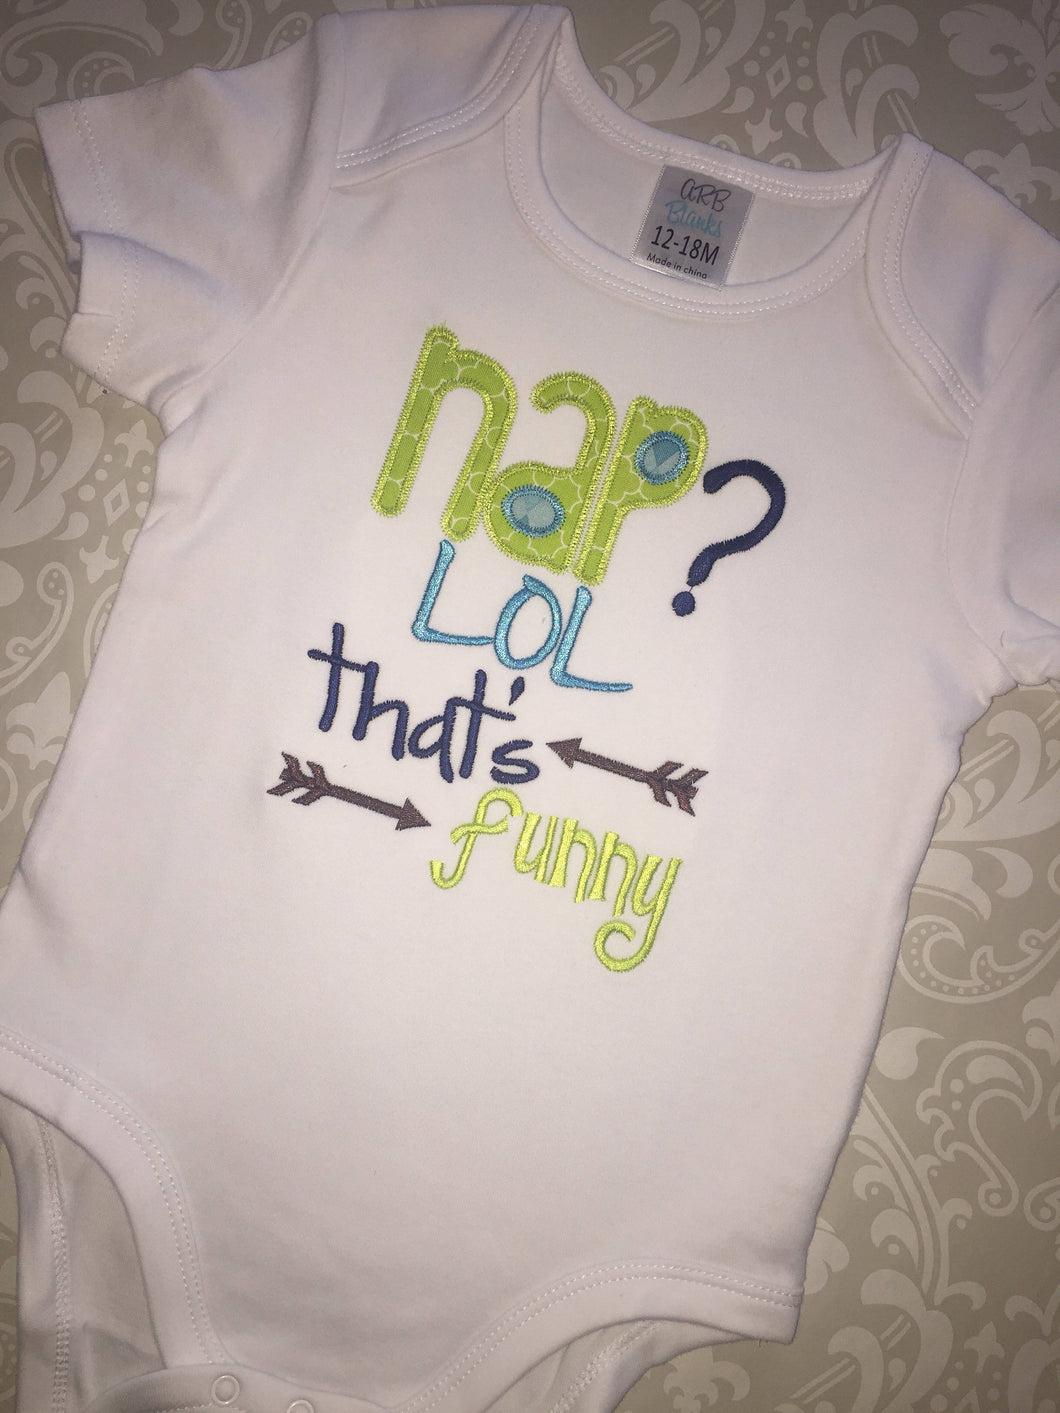 Nap? LOL that's funny baby bodysuit or tee